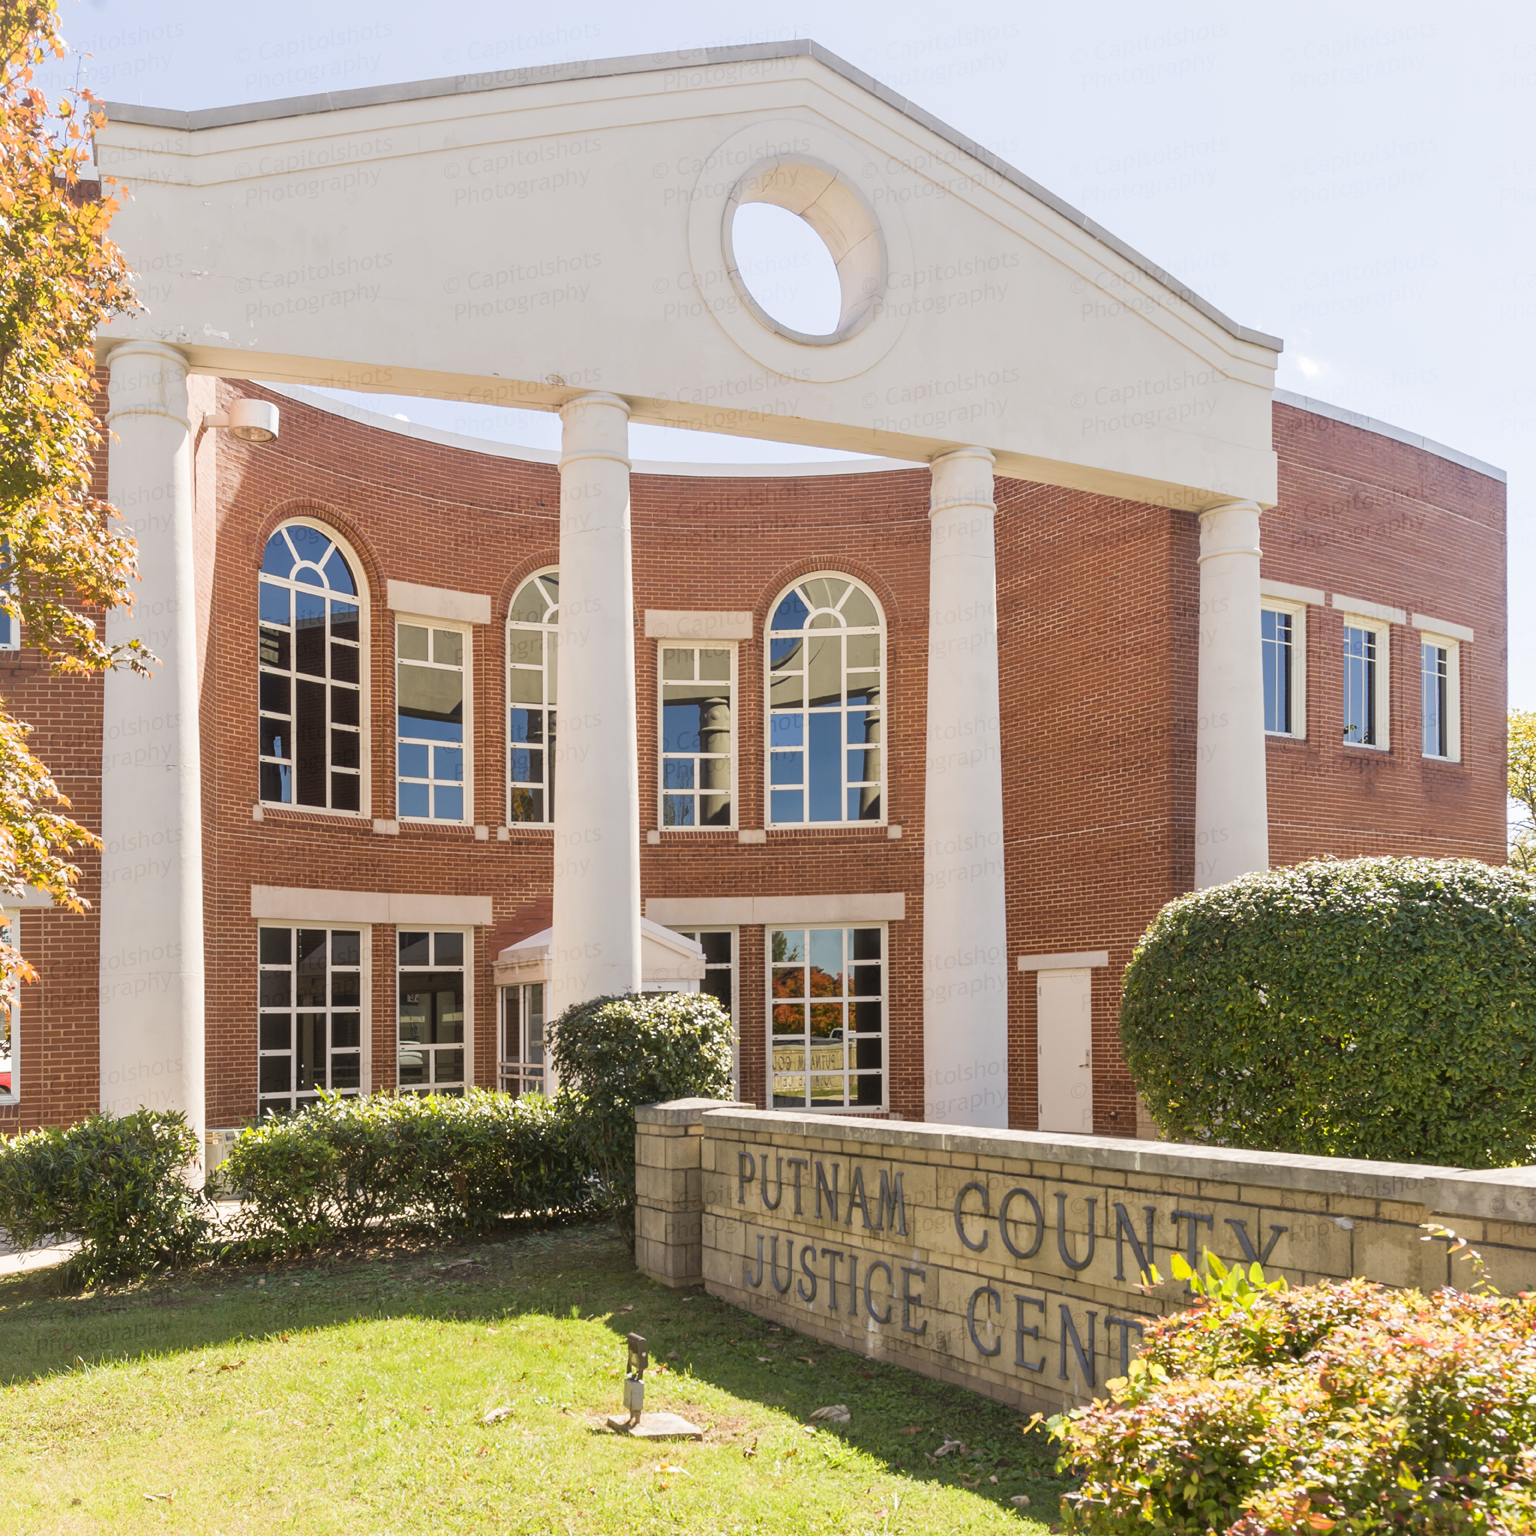 Putnam County Justice Center (Cookeville Tennessee) Stock Images